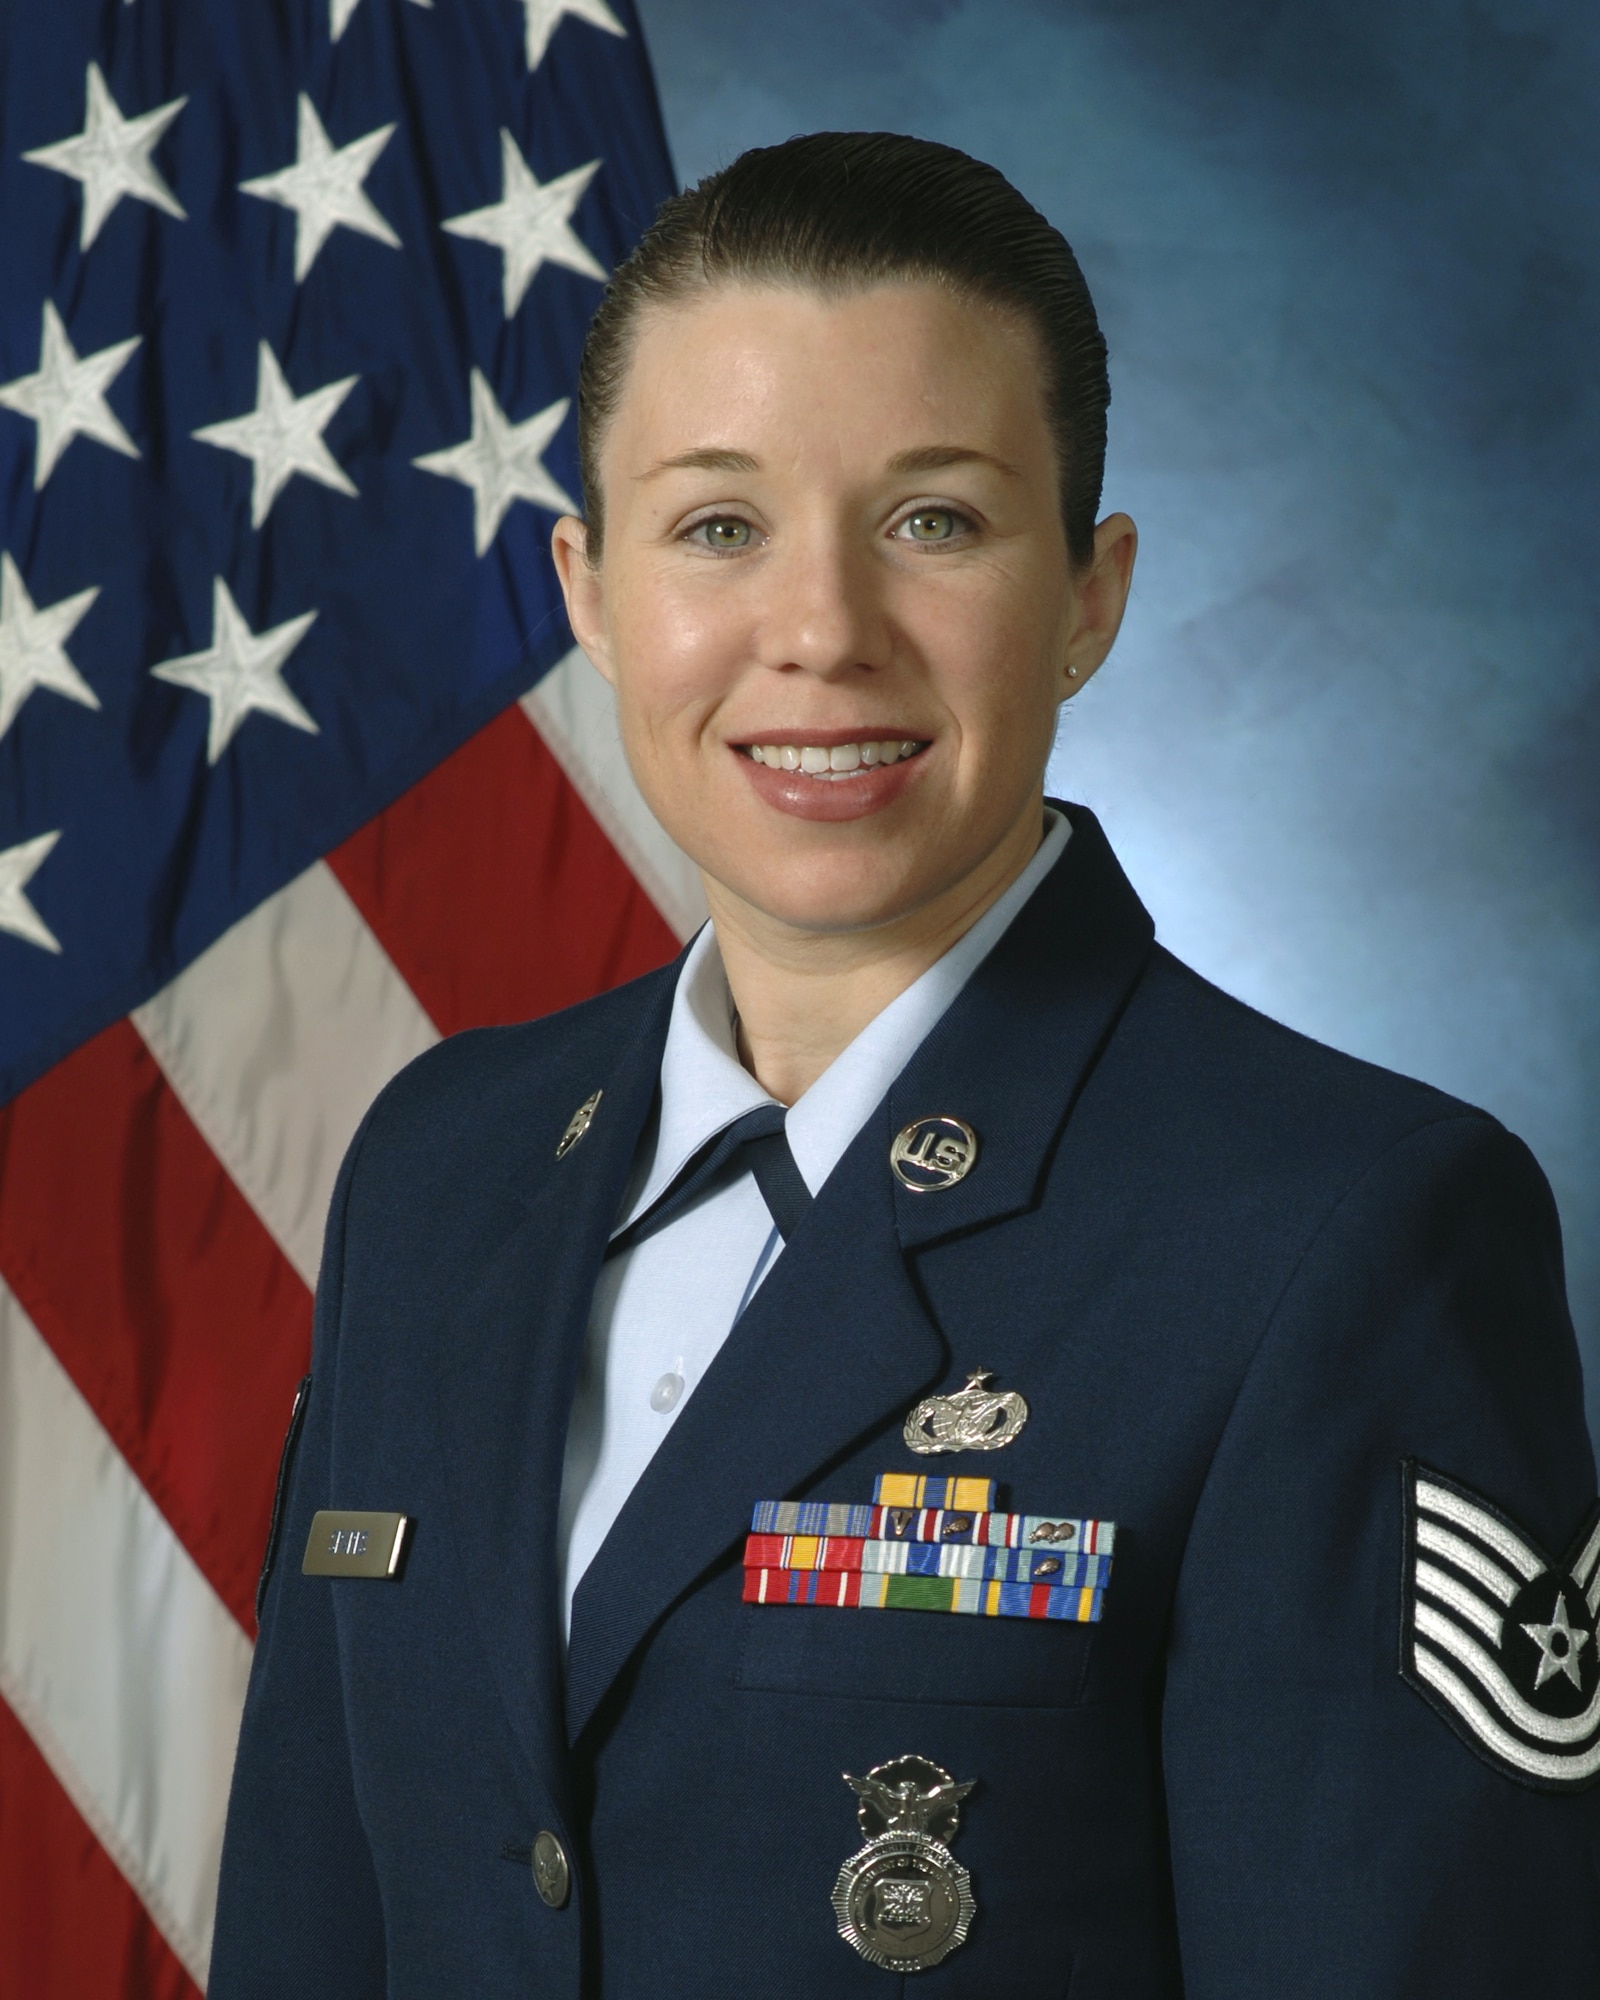 Tech. Sgt. Jessica Sparks, an individual mobilization augmentee who serves as an investigator with the 1st Special Operations Security Forces Squadron, is the 2007 Air Force Special Operations Command IMA Enlisted of the Year. (U.S. Air Force photo)